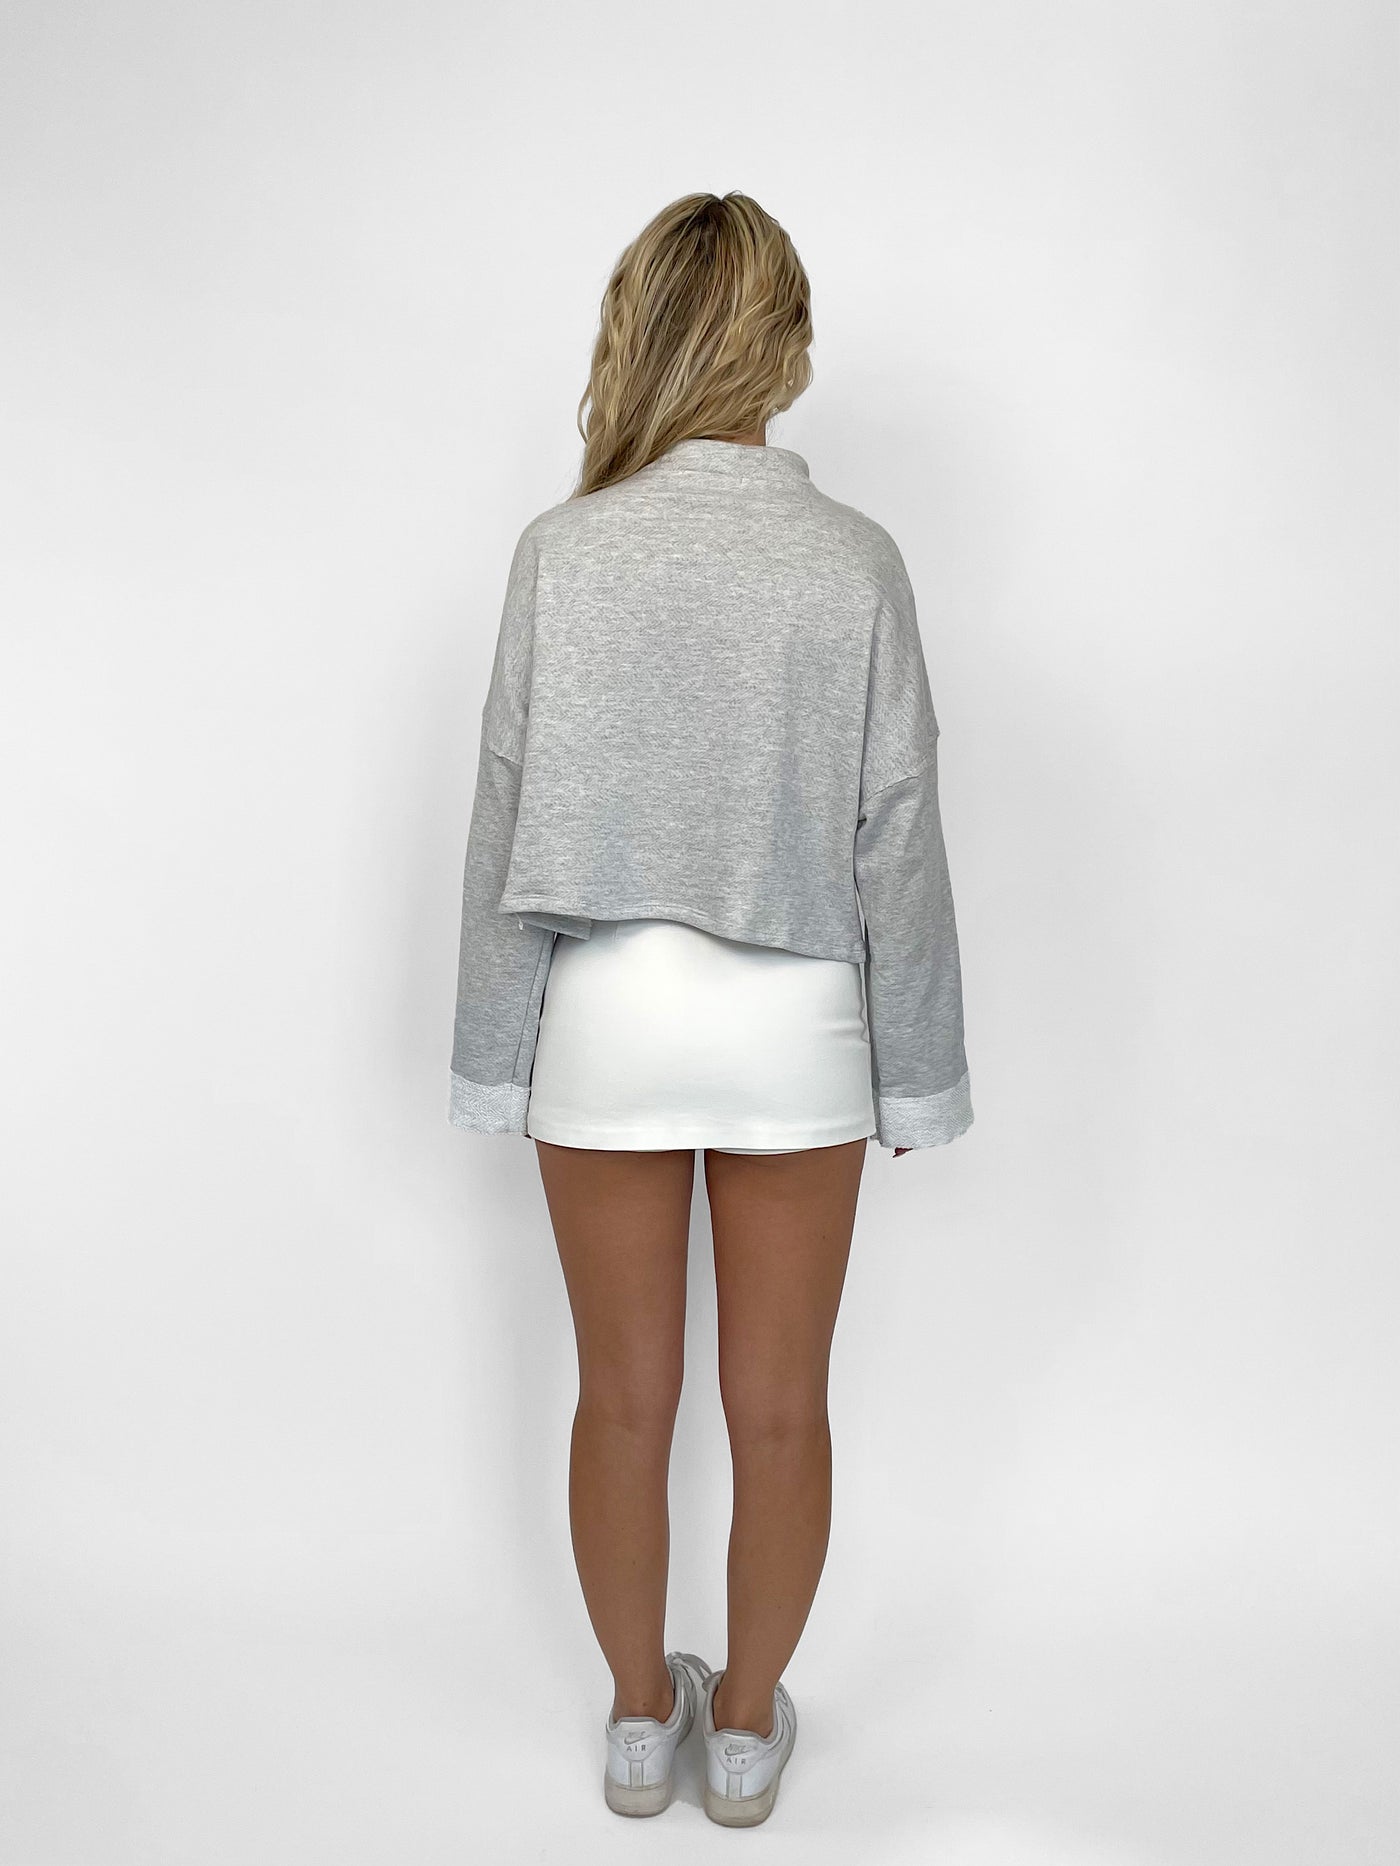 Out Of Town Crop Sweatshirt // Heather Gray